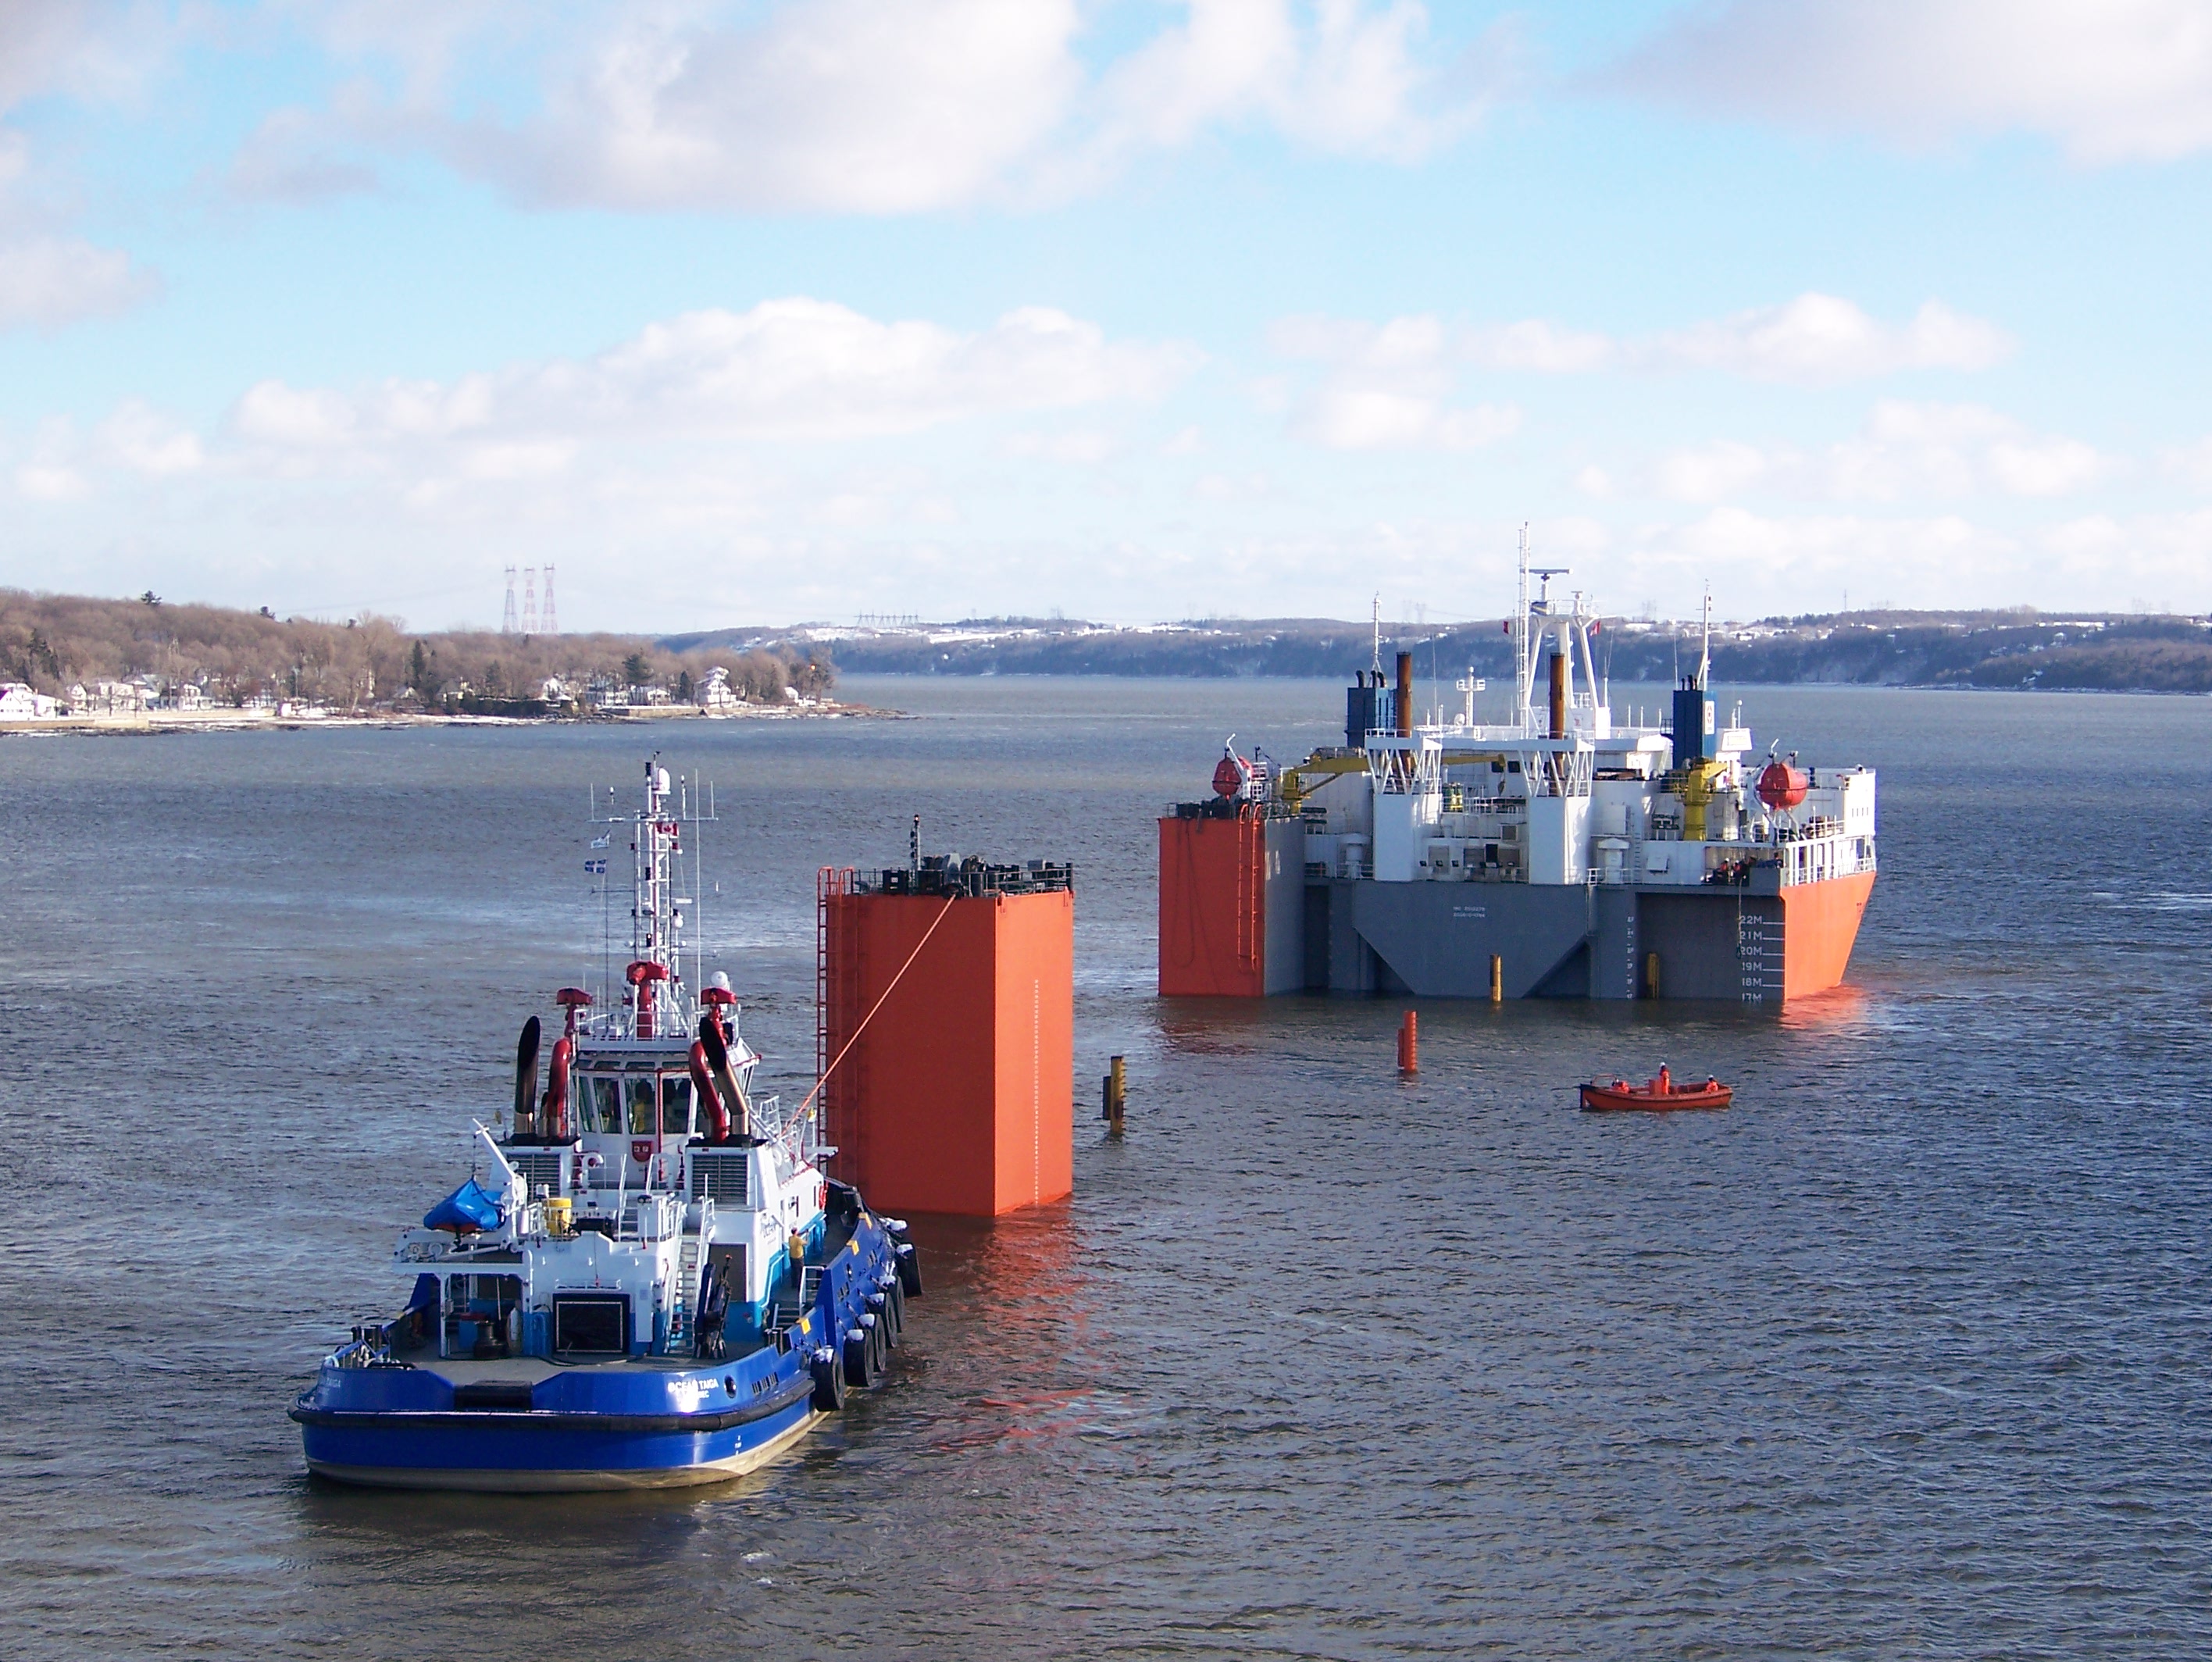 Ocean completes a complex maritime operation on the St. Lawrence